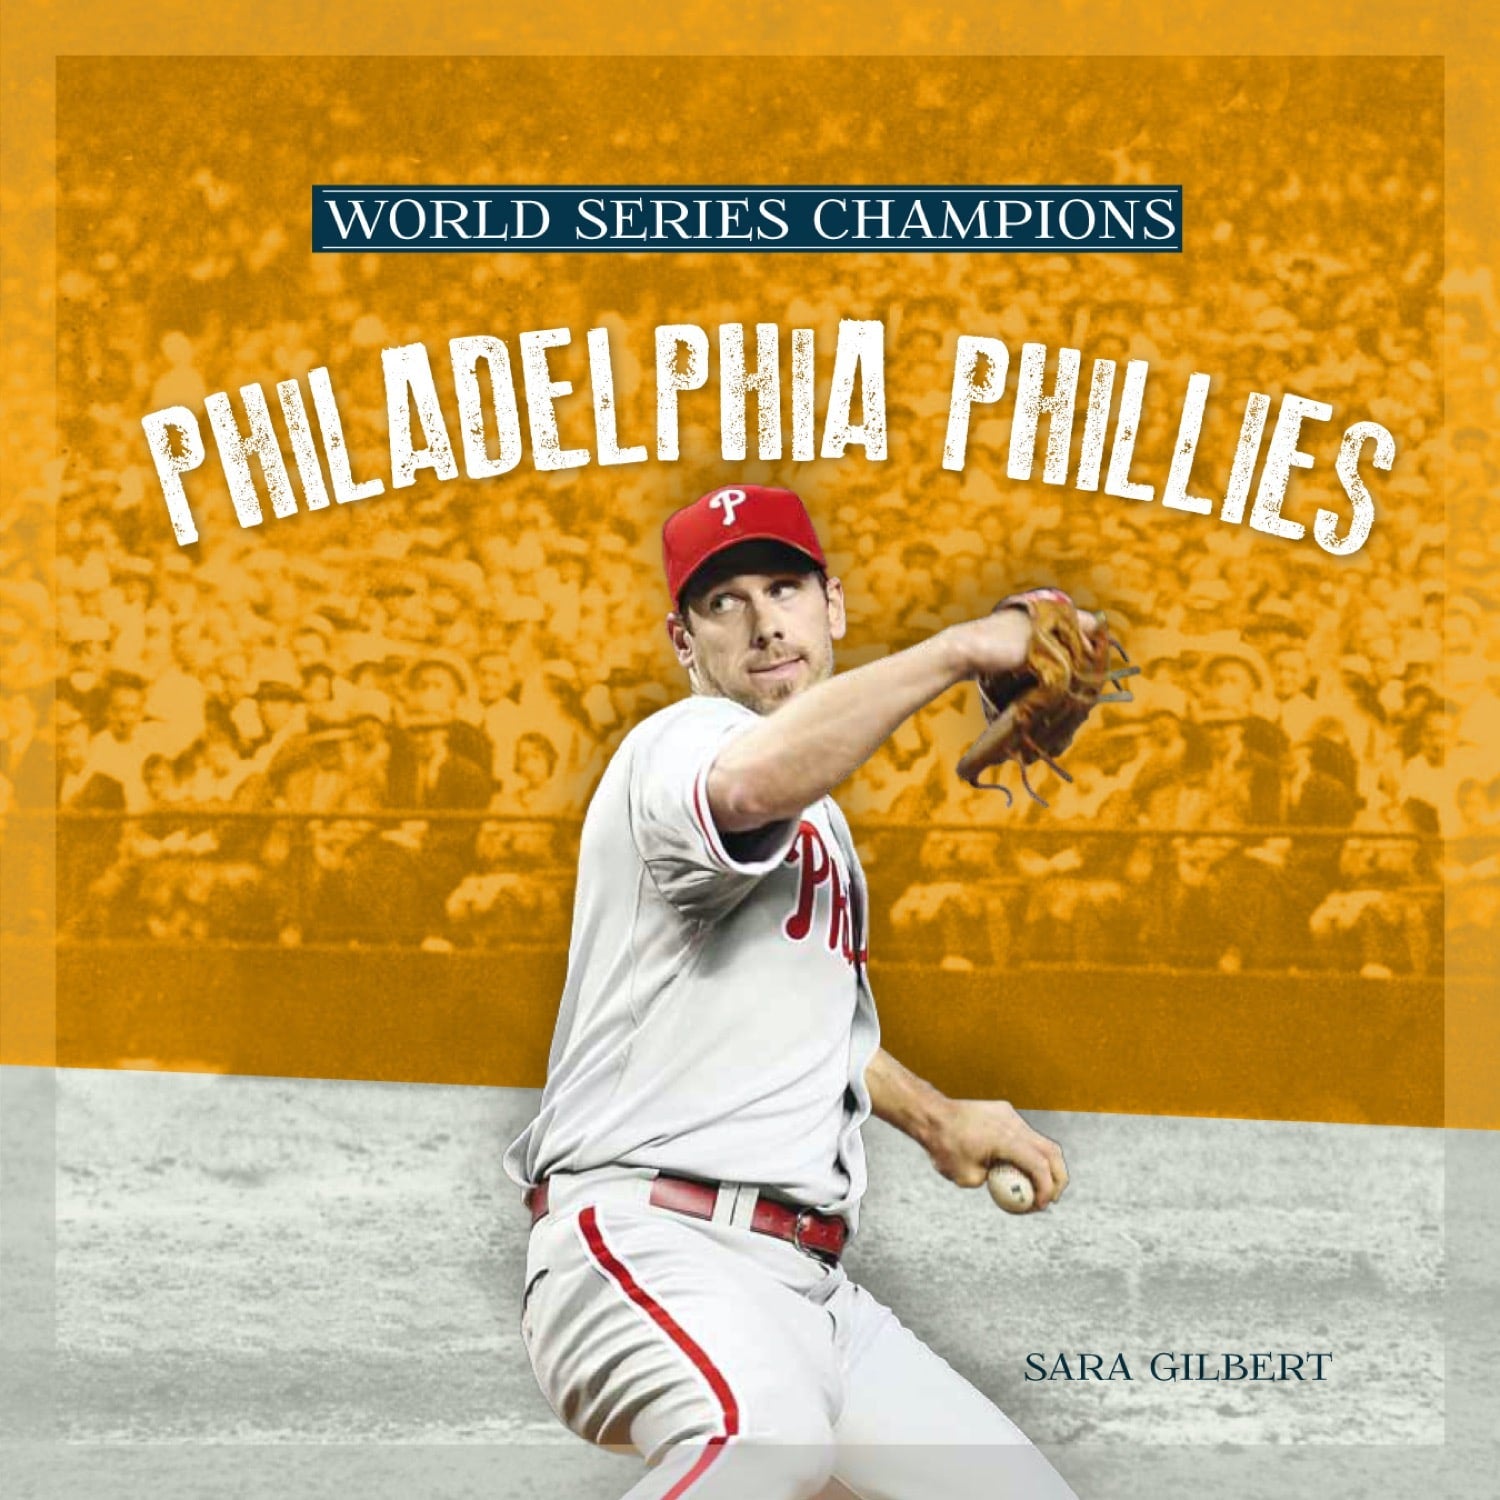 Phil and Phyllis Quakers Cooperstown World Champions Retro Philadelphi